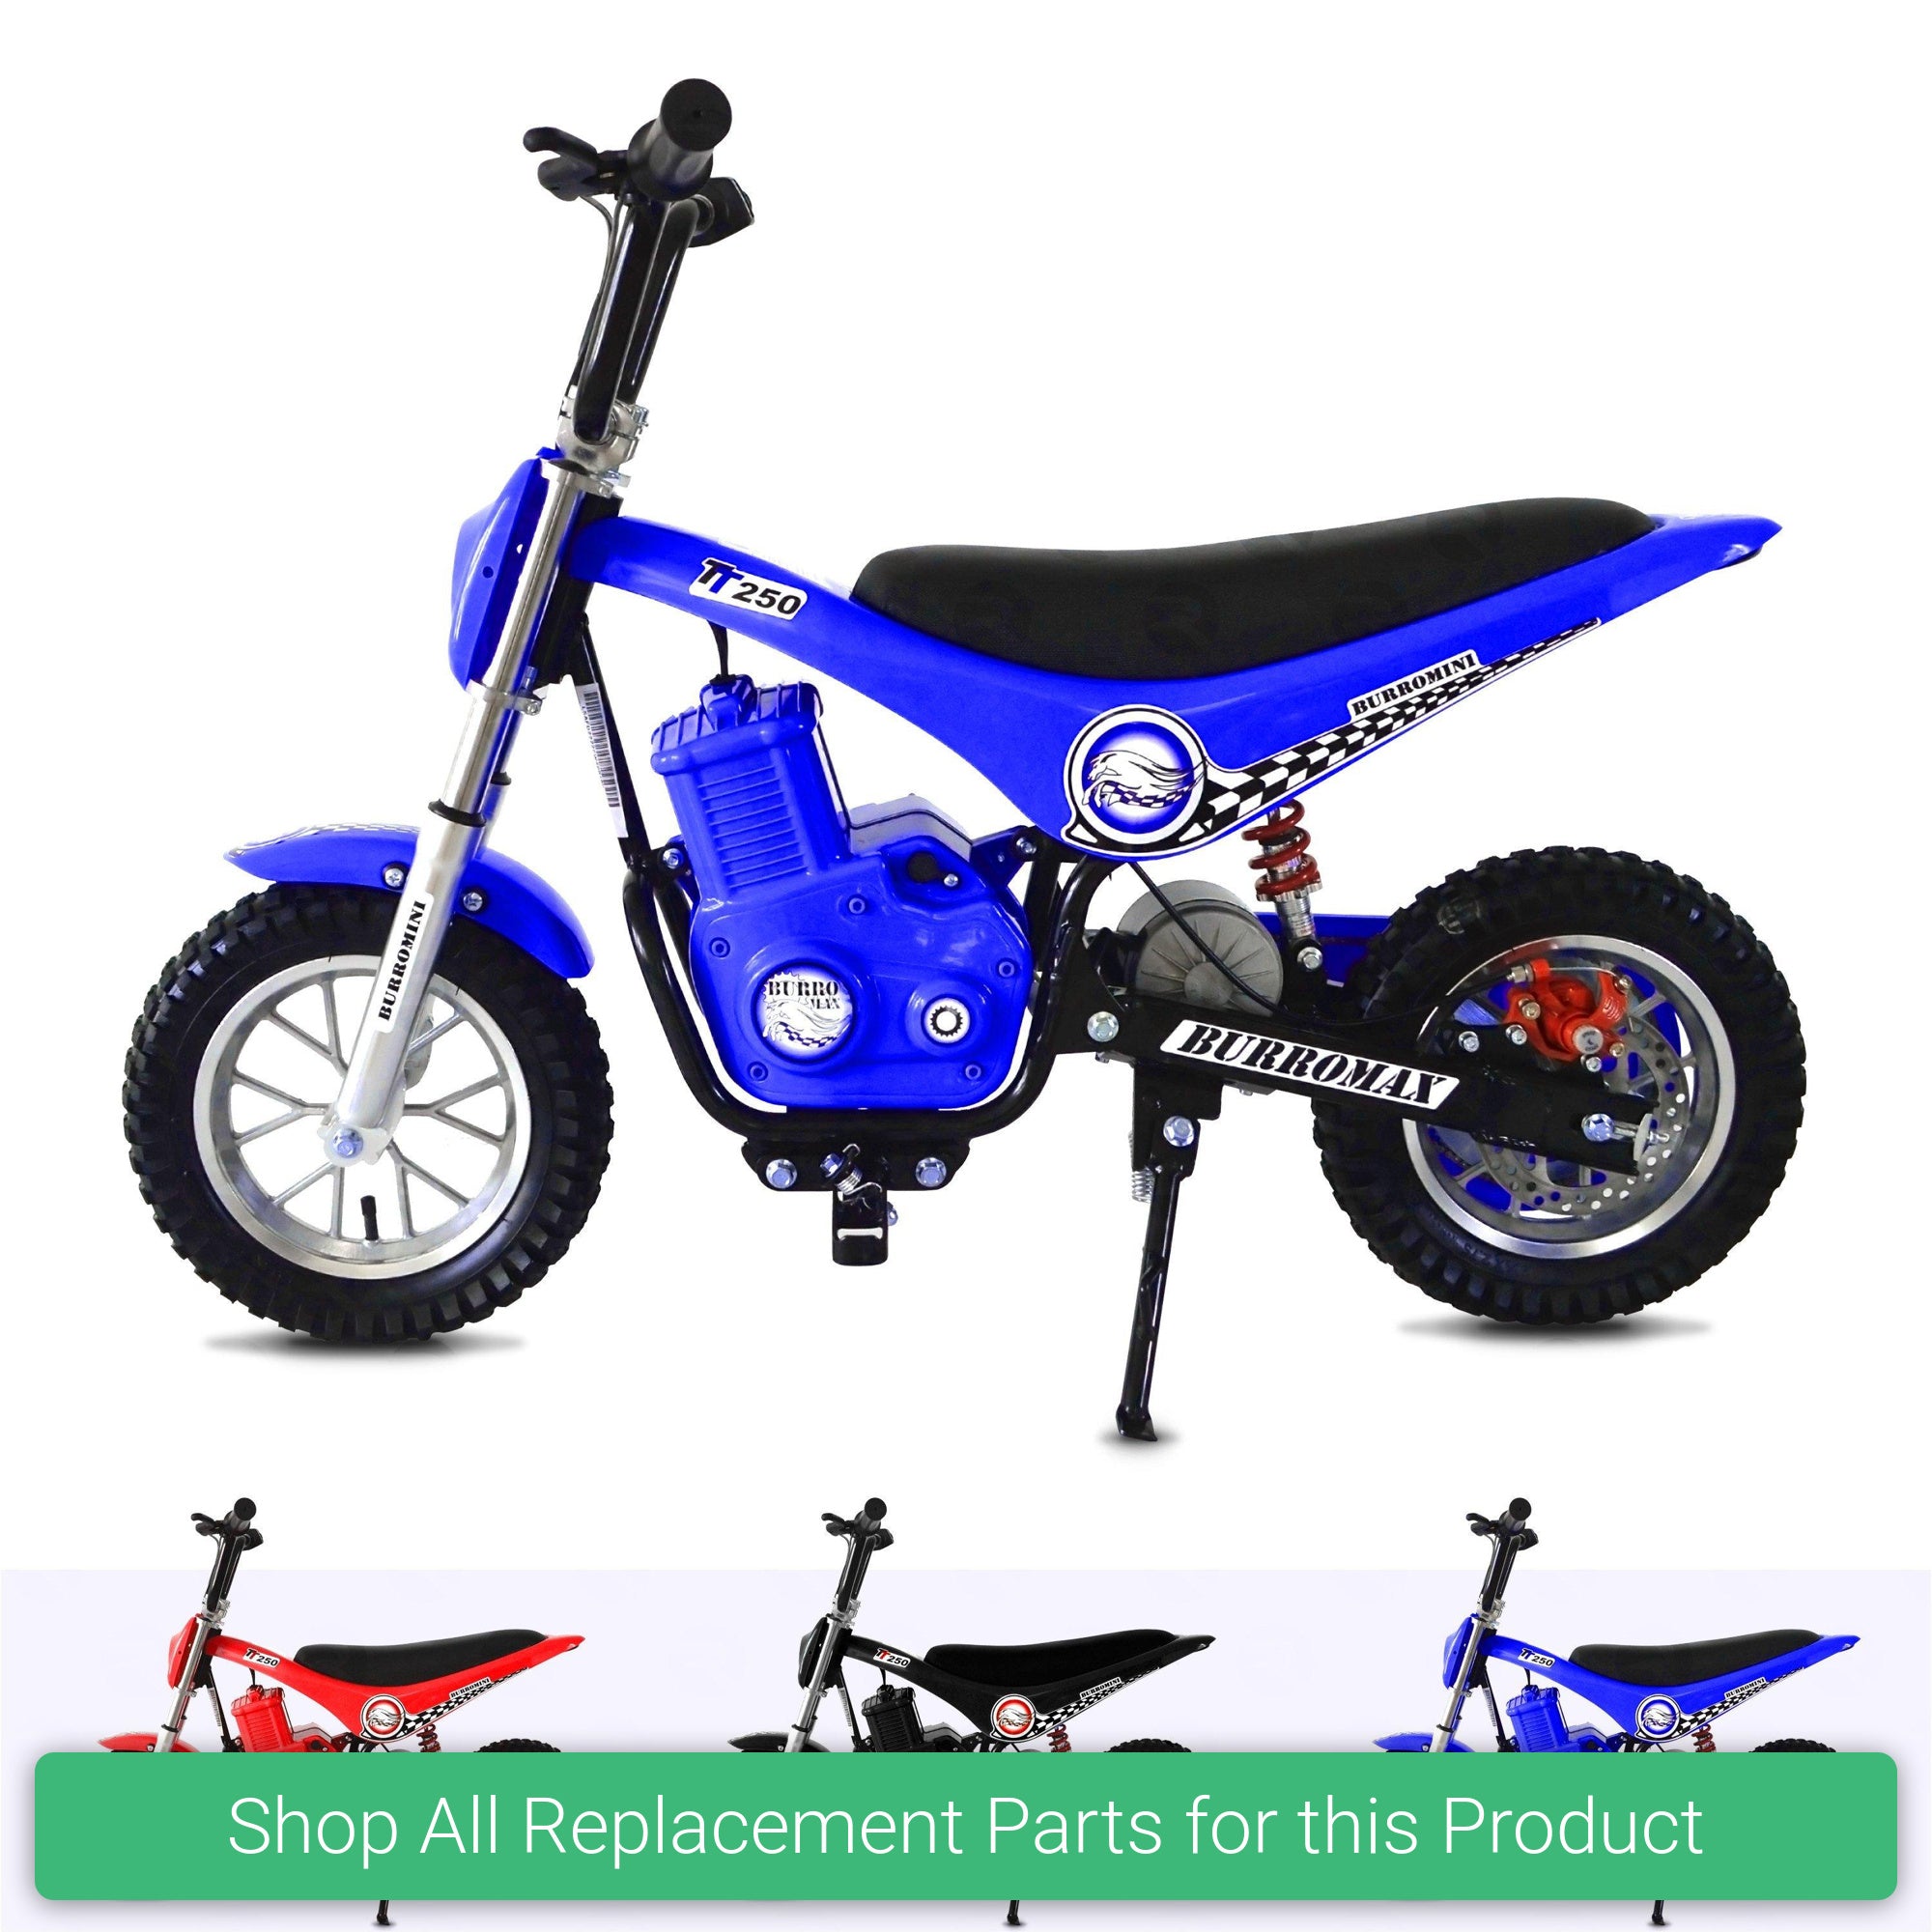 Replacement Parts and Spares for Kids 250W Mini Dirt Bike - 250WBIK-2016 - FSD250DH-2